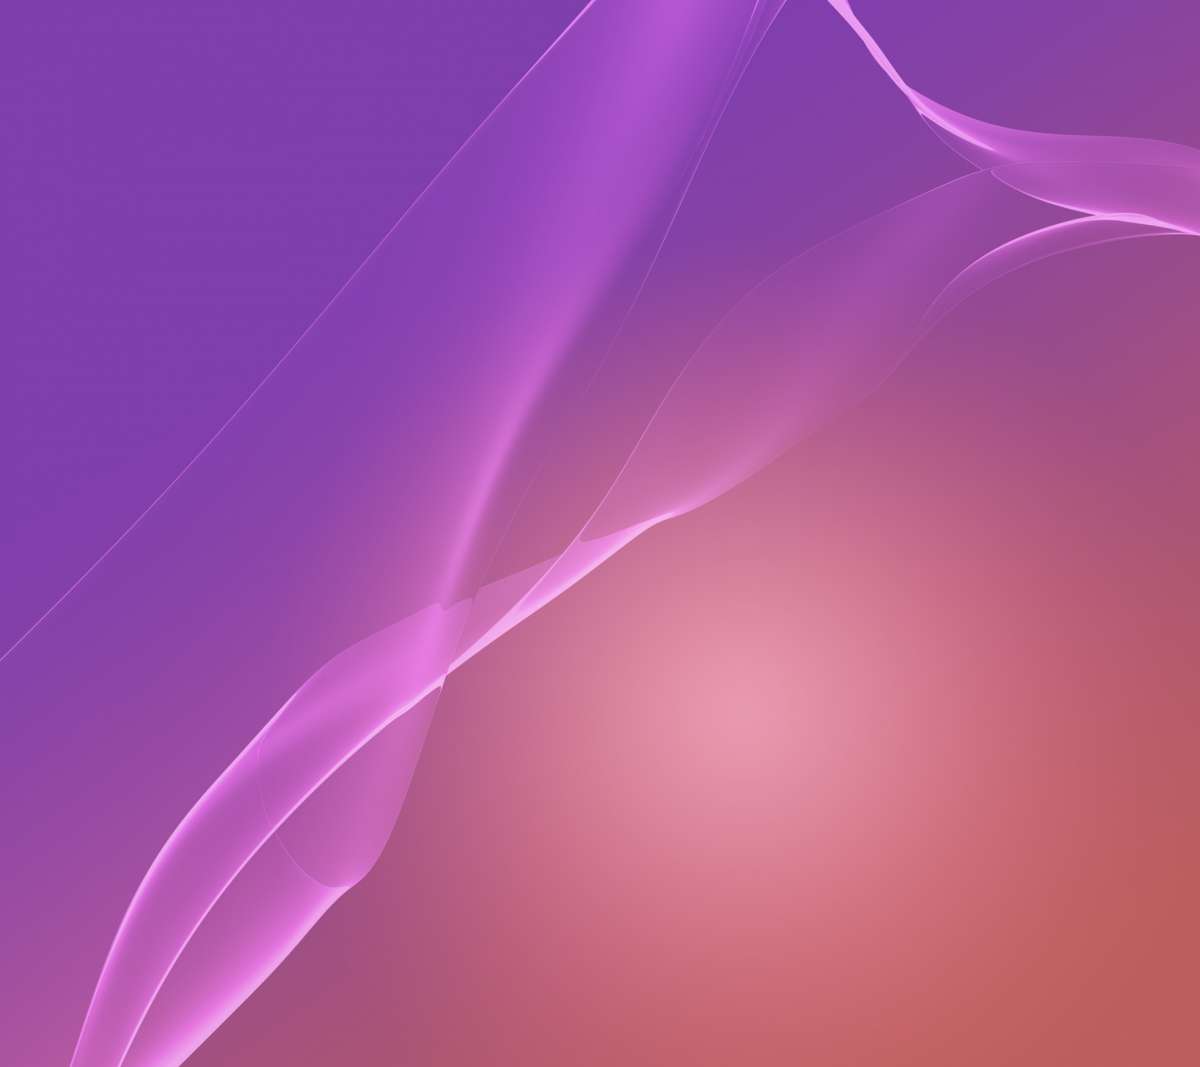 Download] Get the Sony Xperia Z2 wallpapers here now!